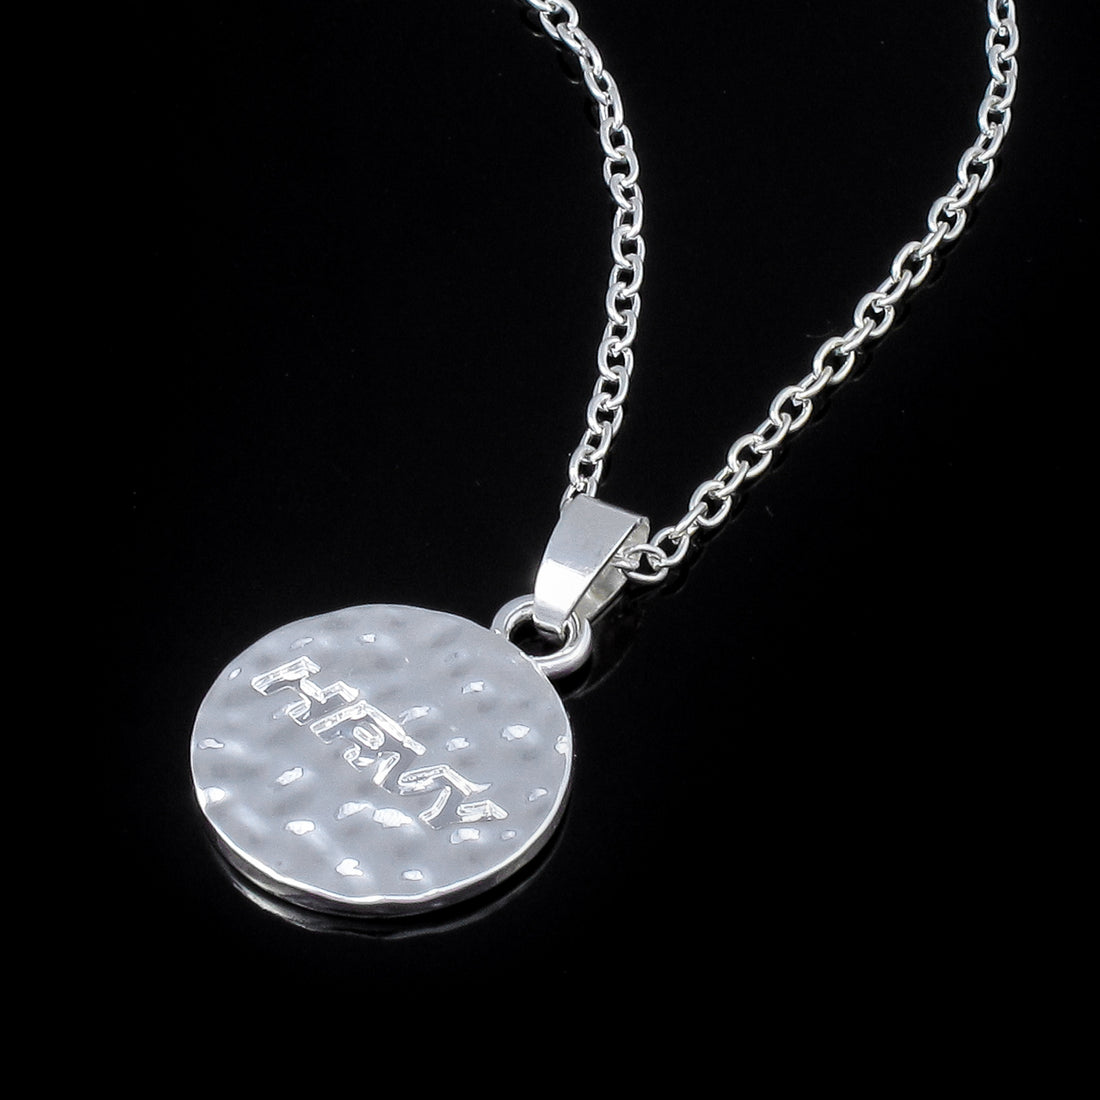 HRVY Stamped Coin Necklace